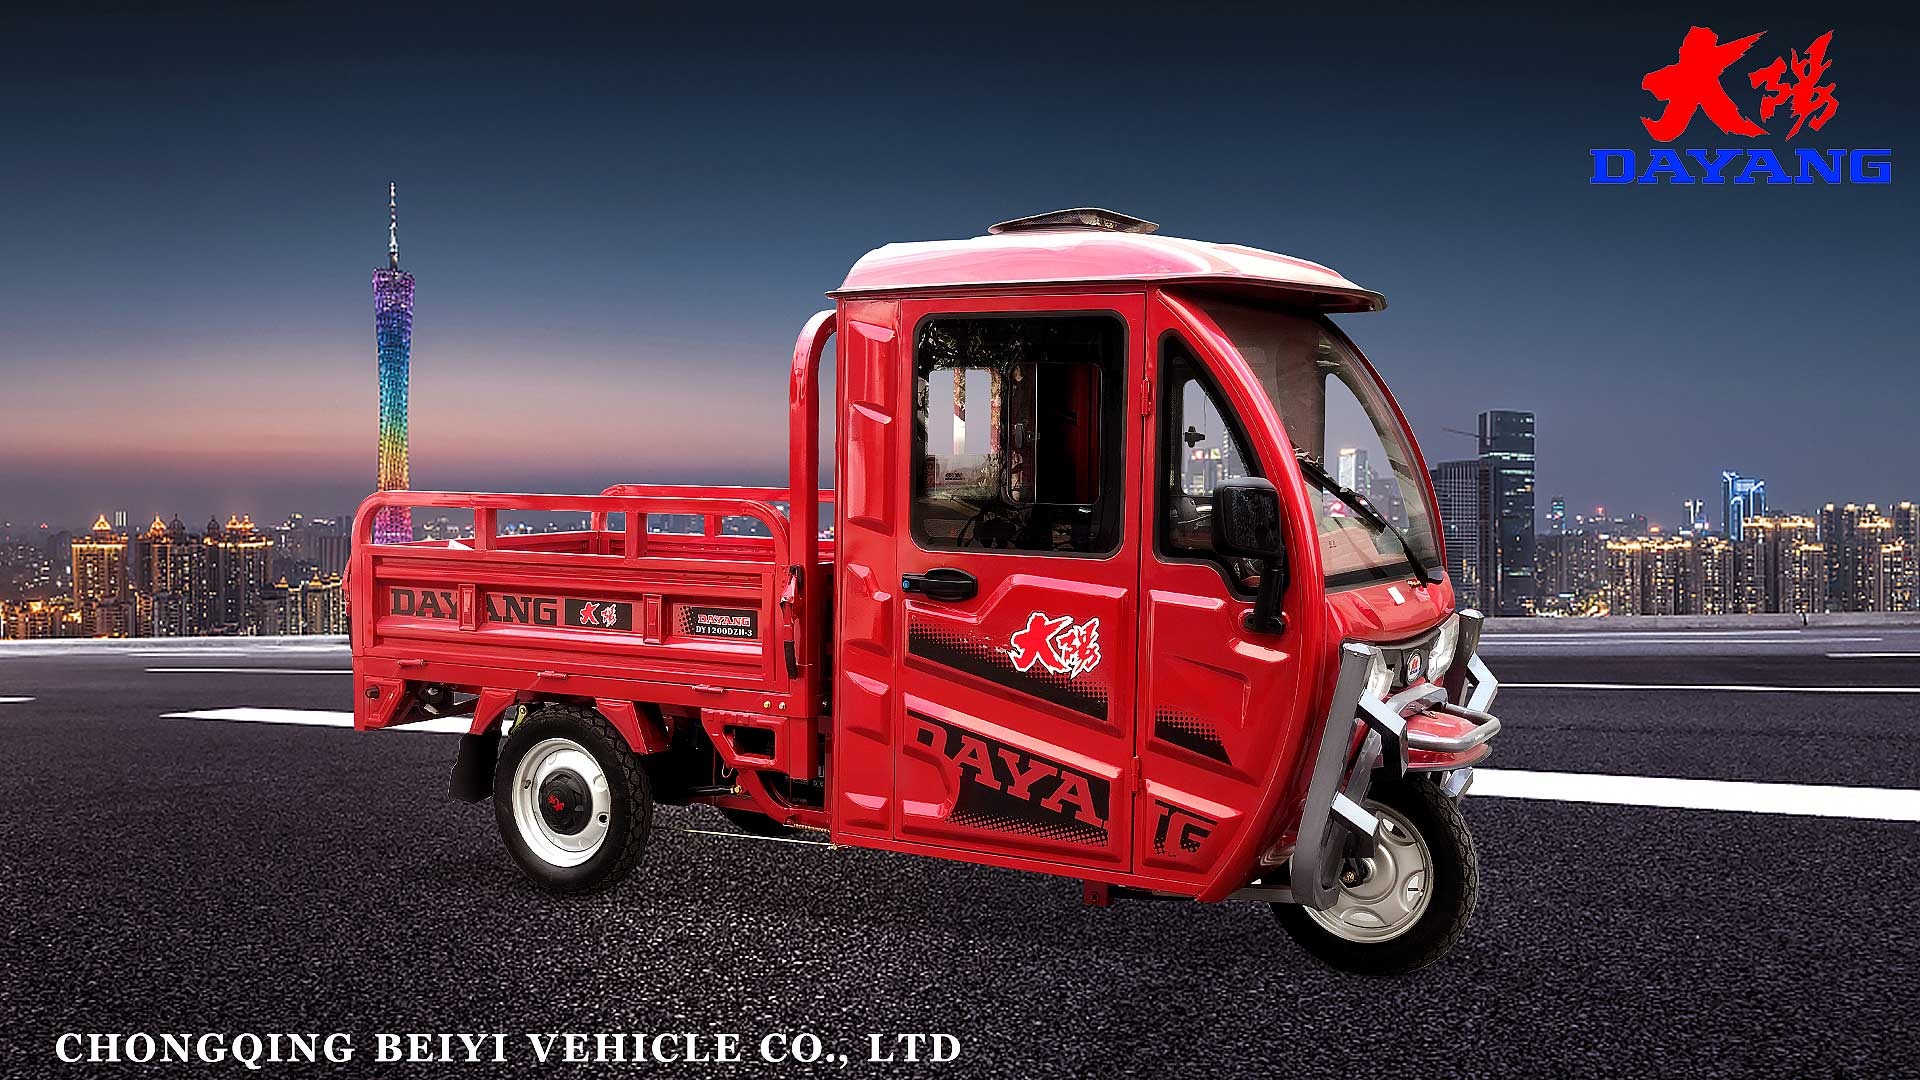 DAYANG Electric 1000W 1200W 1500W 60V loading 1000kg cargo electric tricycles with open cabin used in farm